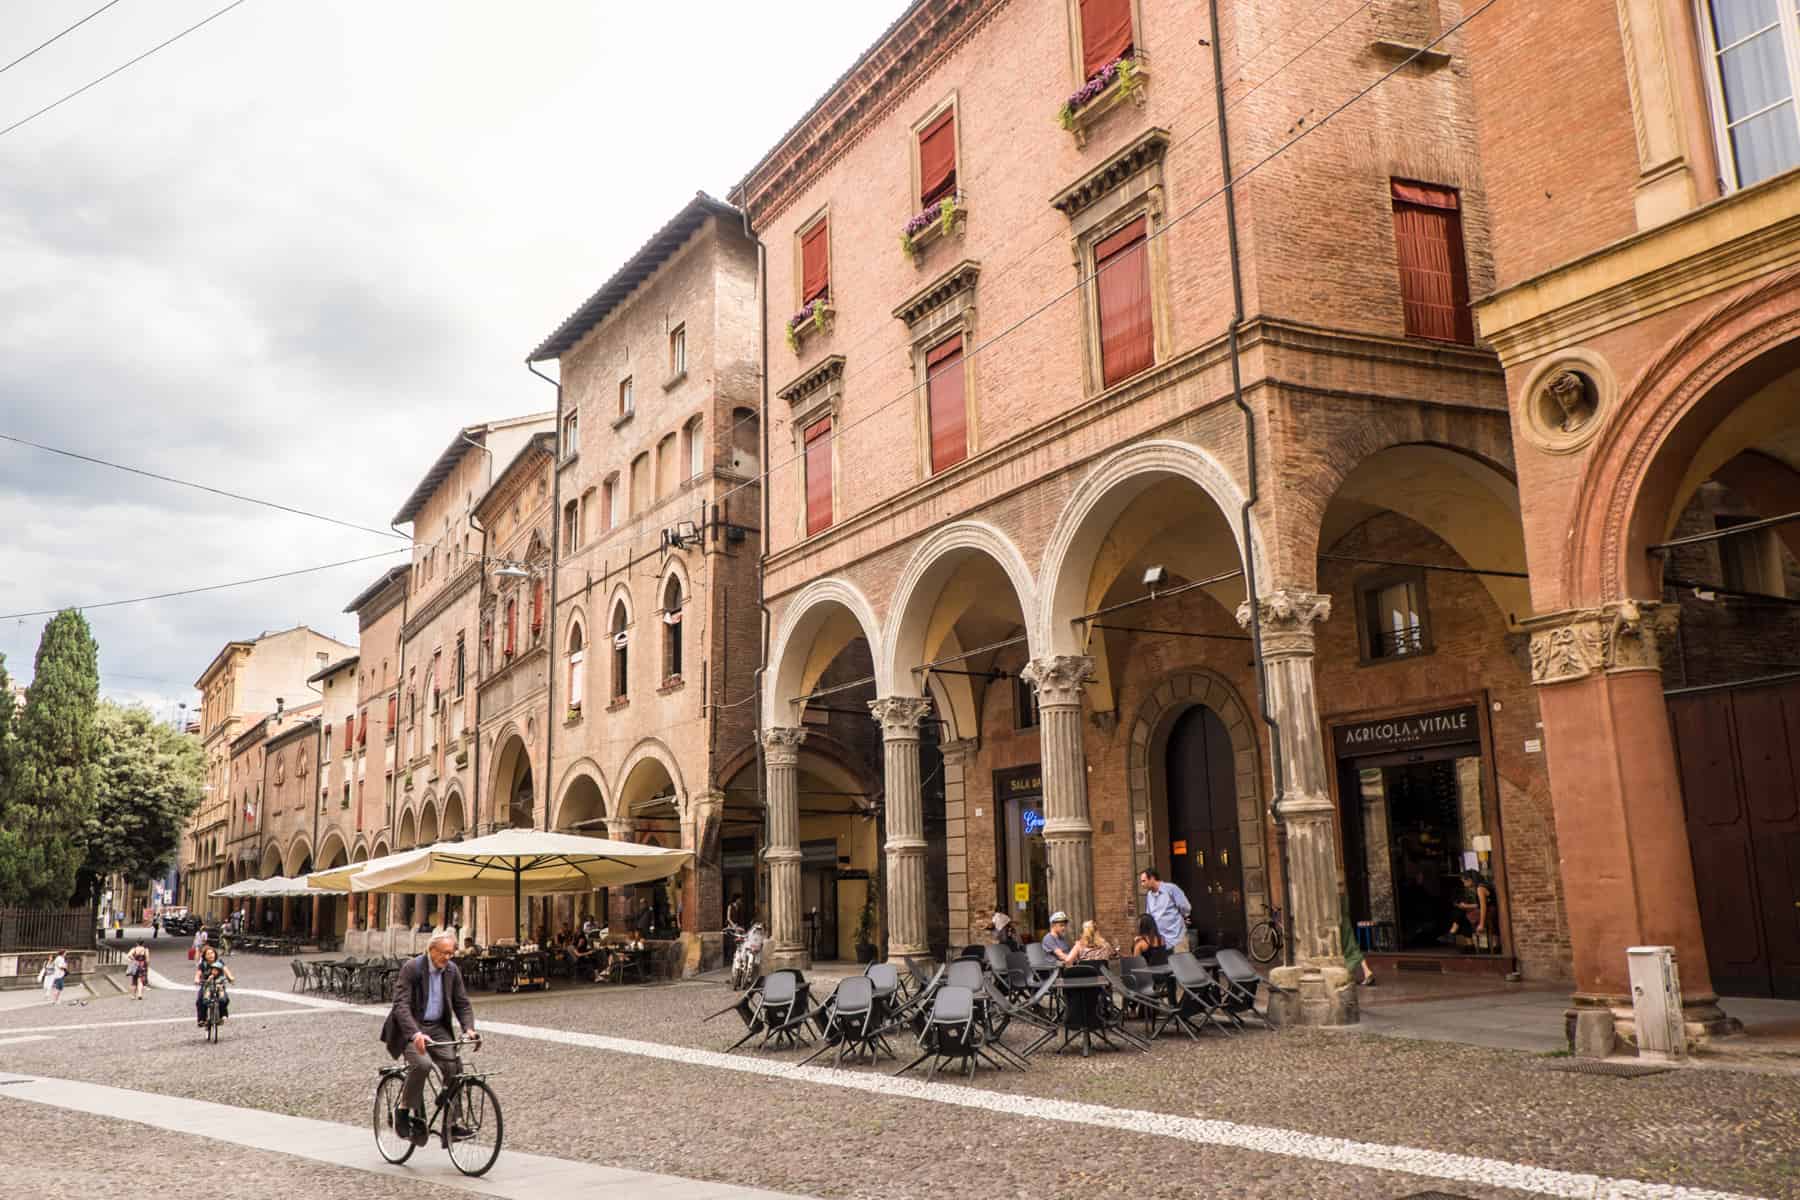 People sit at a cafe under umbrellas and a man rides a bike past opulent white arched orange buildings in Bologna, Italia. 